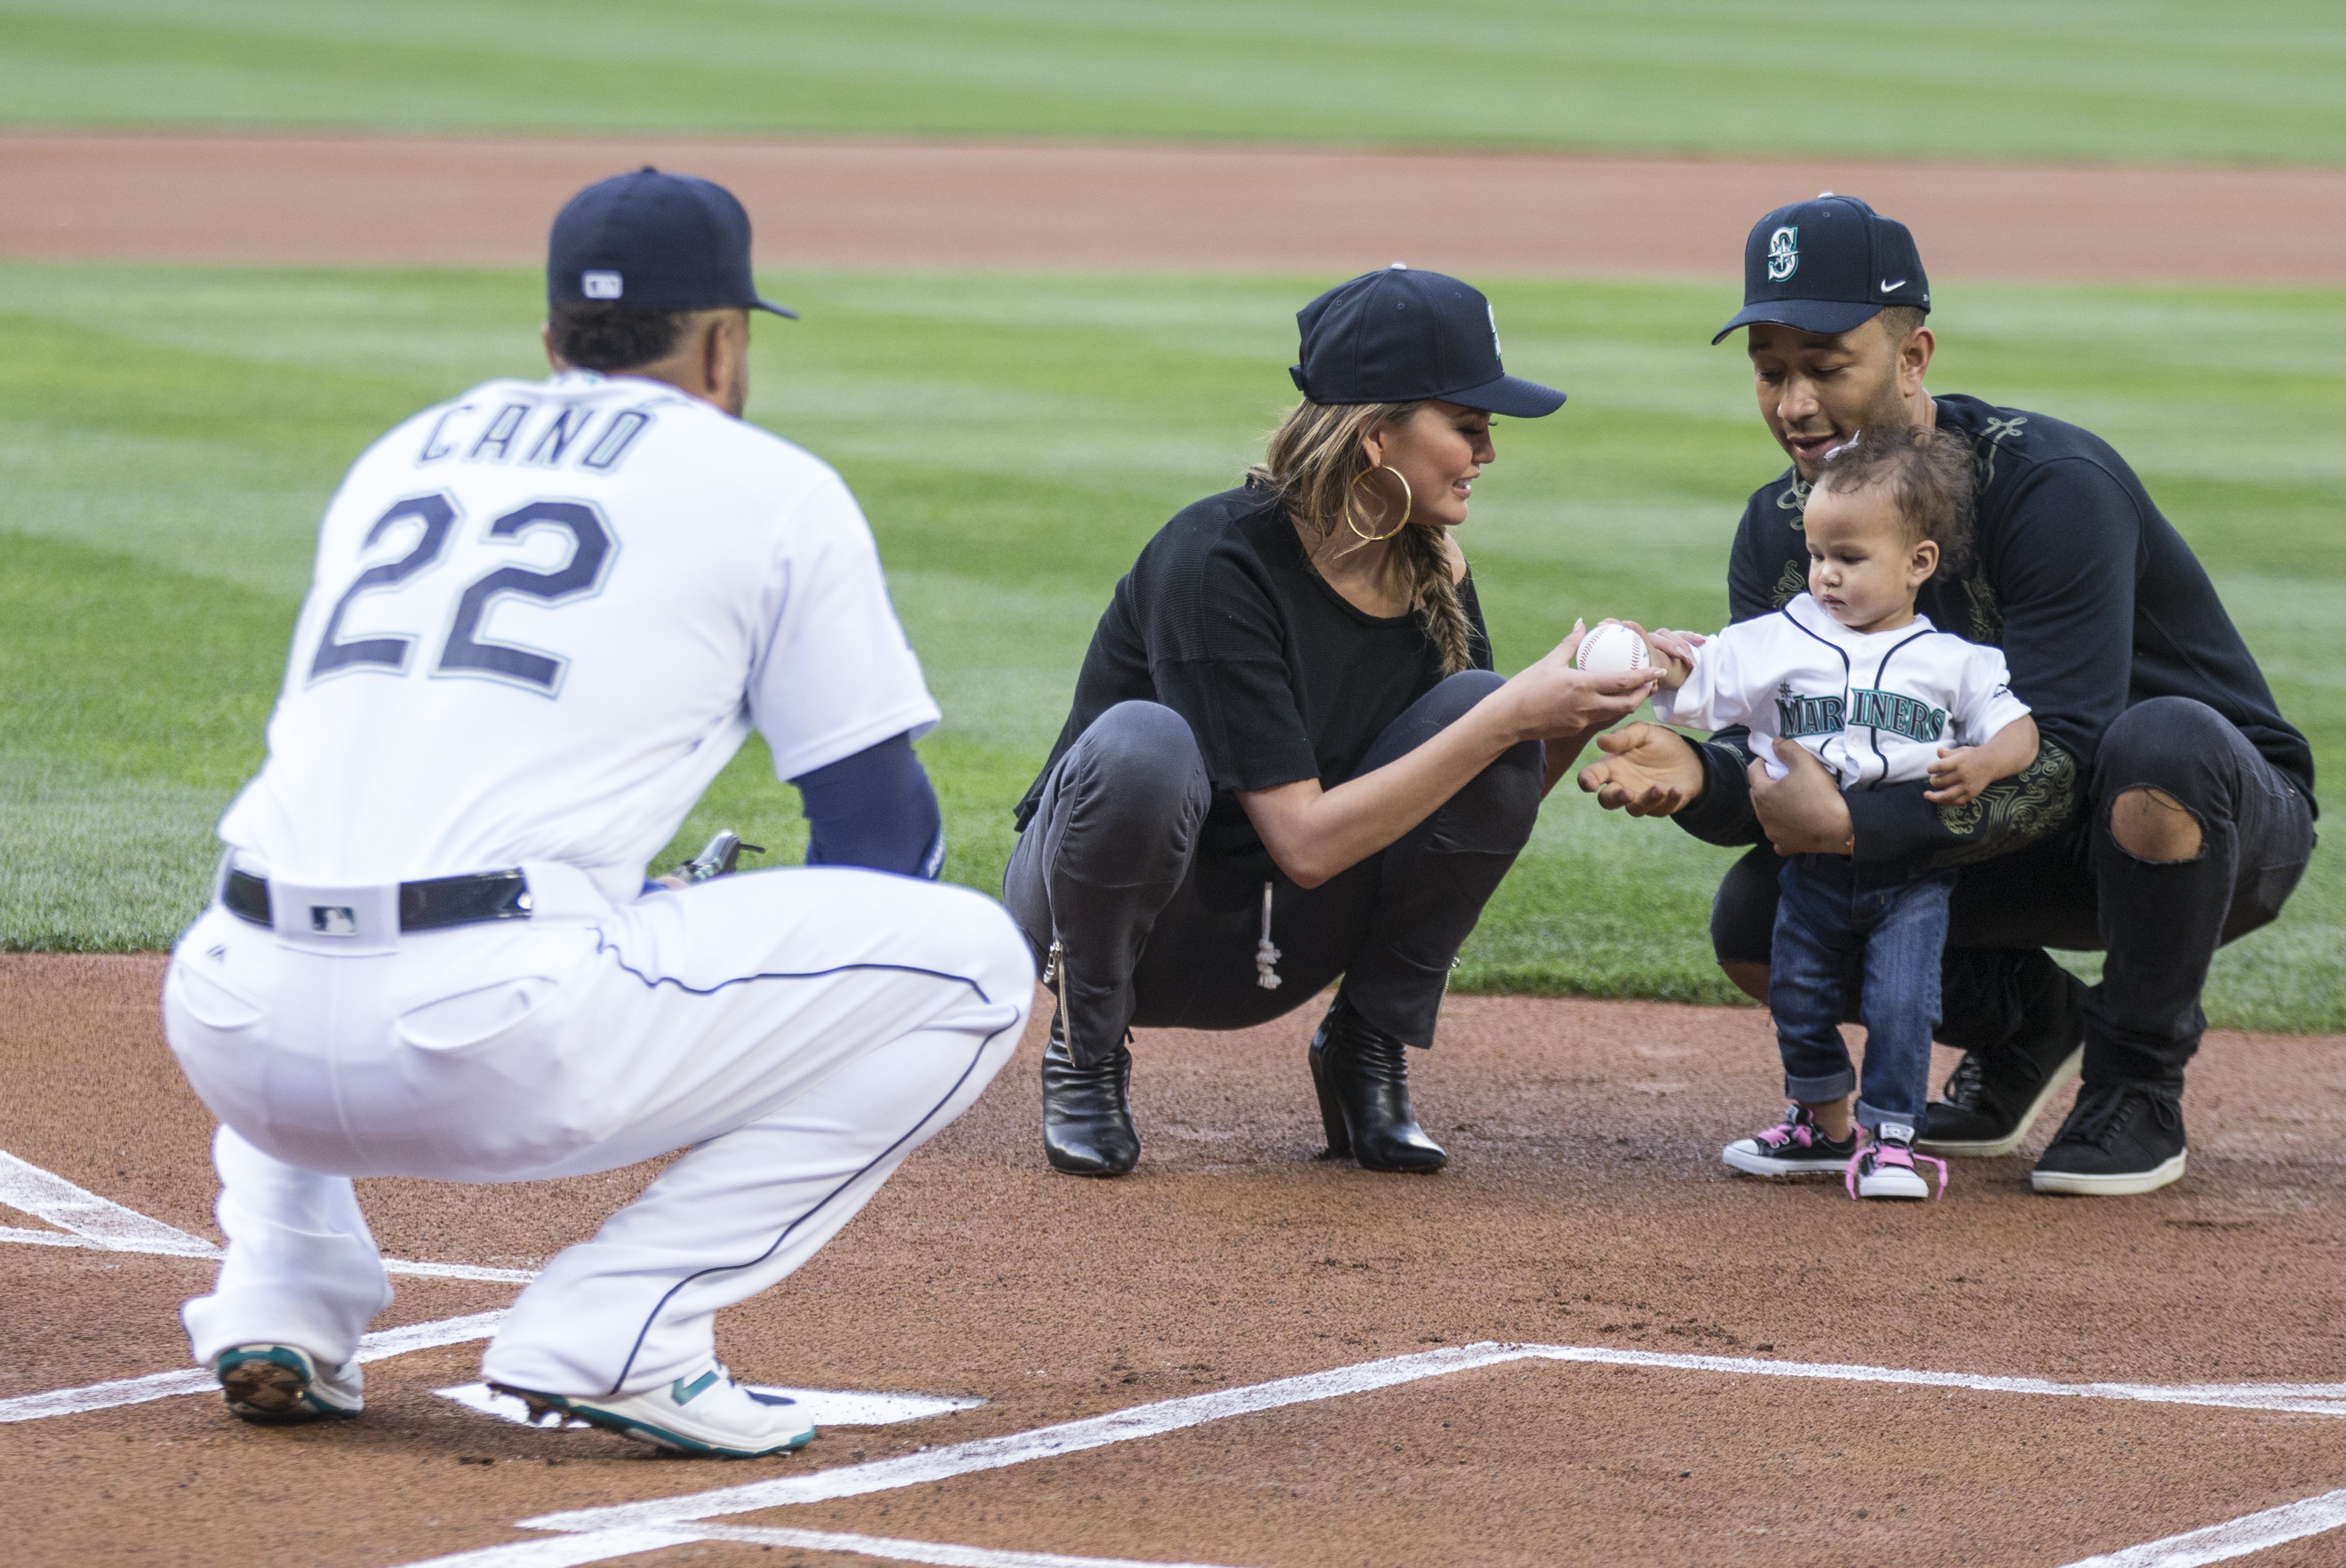 Chrissy Teigen and John Legend help Luna Stephens throw out the ceremonial first pitch to Robinson Cano of the Seattle Mariners before a game | Source: Getty Images